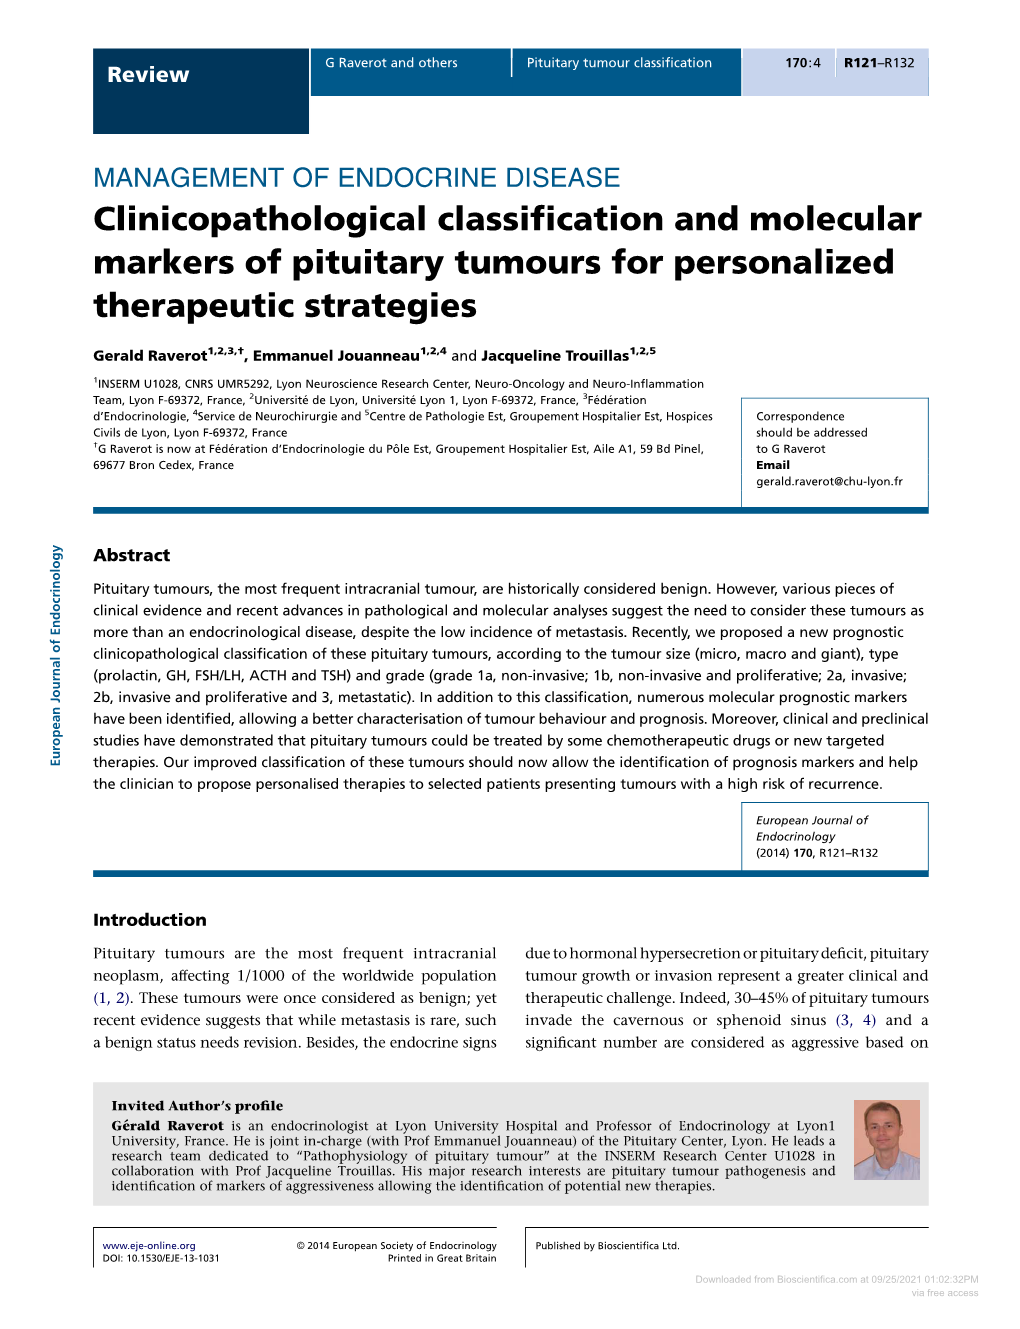 Clinicopathological Classification and Molecular Markers of Pituitary